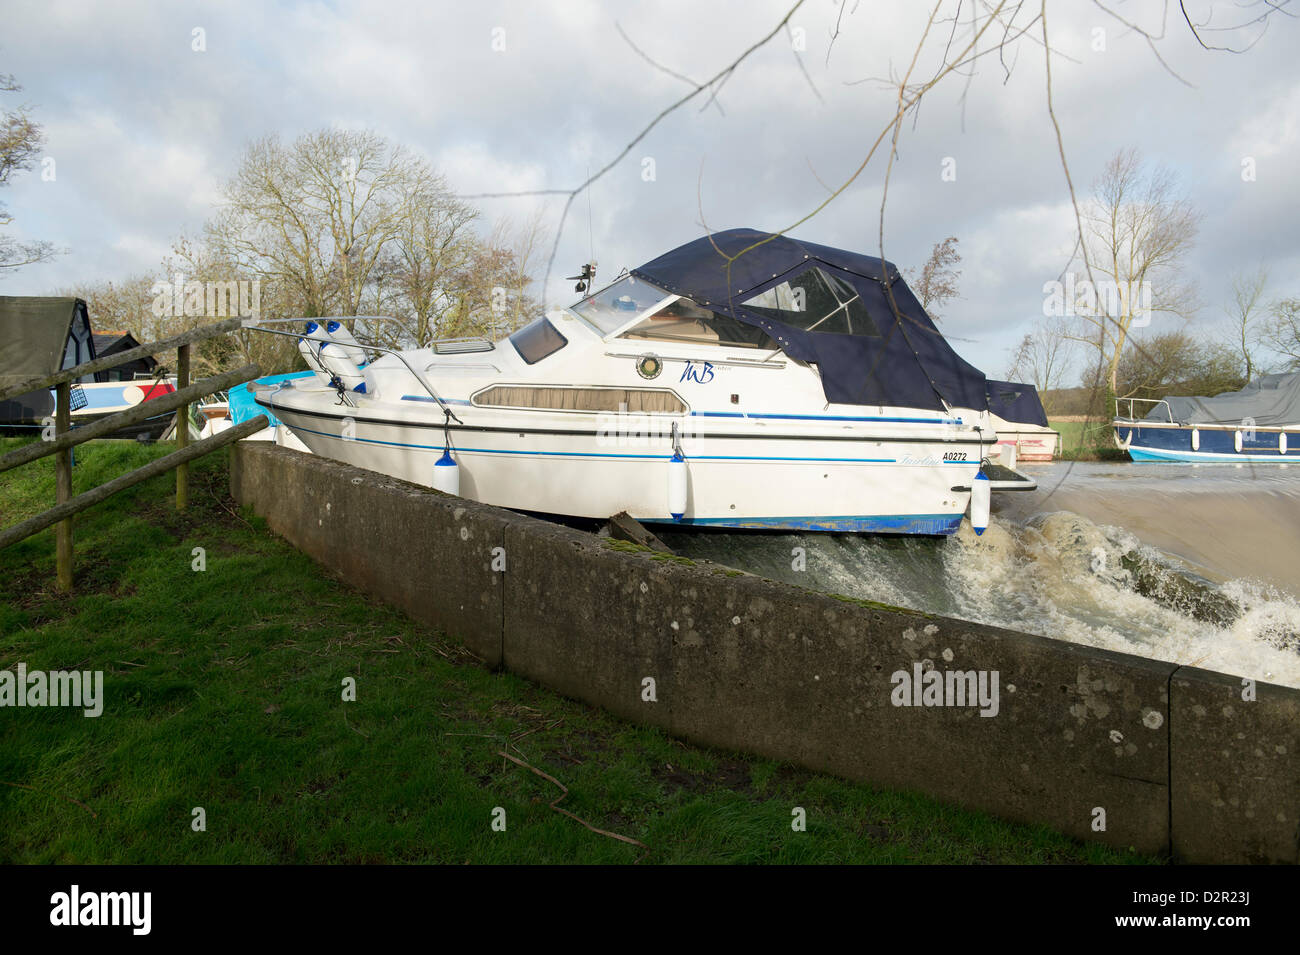 Little Baddow, Essex, UK. 31st January 2013.  A motor cruiser, Miss Behavin', sits precariously on a weir at Paper Mill Lock. The river is very high and fast after recent rain and snow melt. Officers from Essex Waterways have secured the vessel and are waiting to recover it. It is believed that vandals have taken the mooring ropes, as the boat has drifted 200m and ropes cannot be found. Allsorts Stock Photo/Alamy Live News Stock Photo